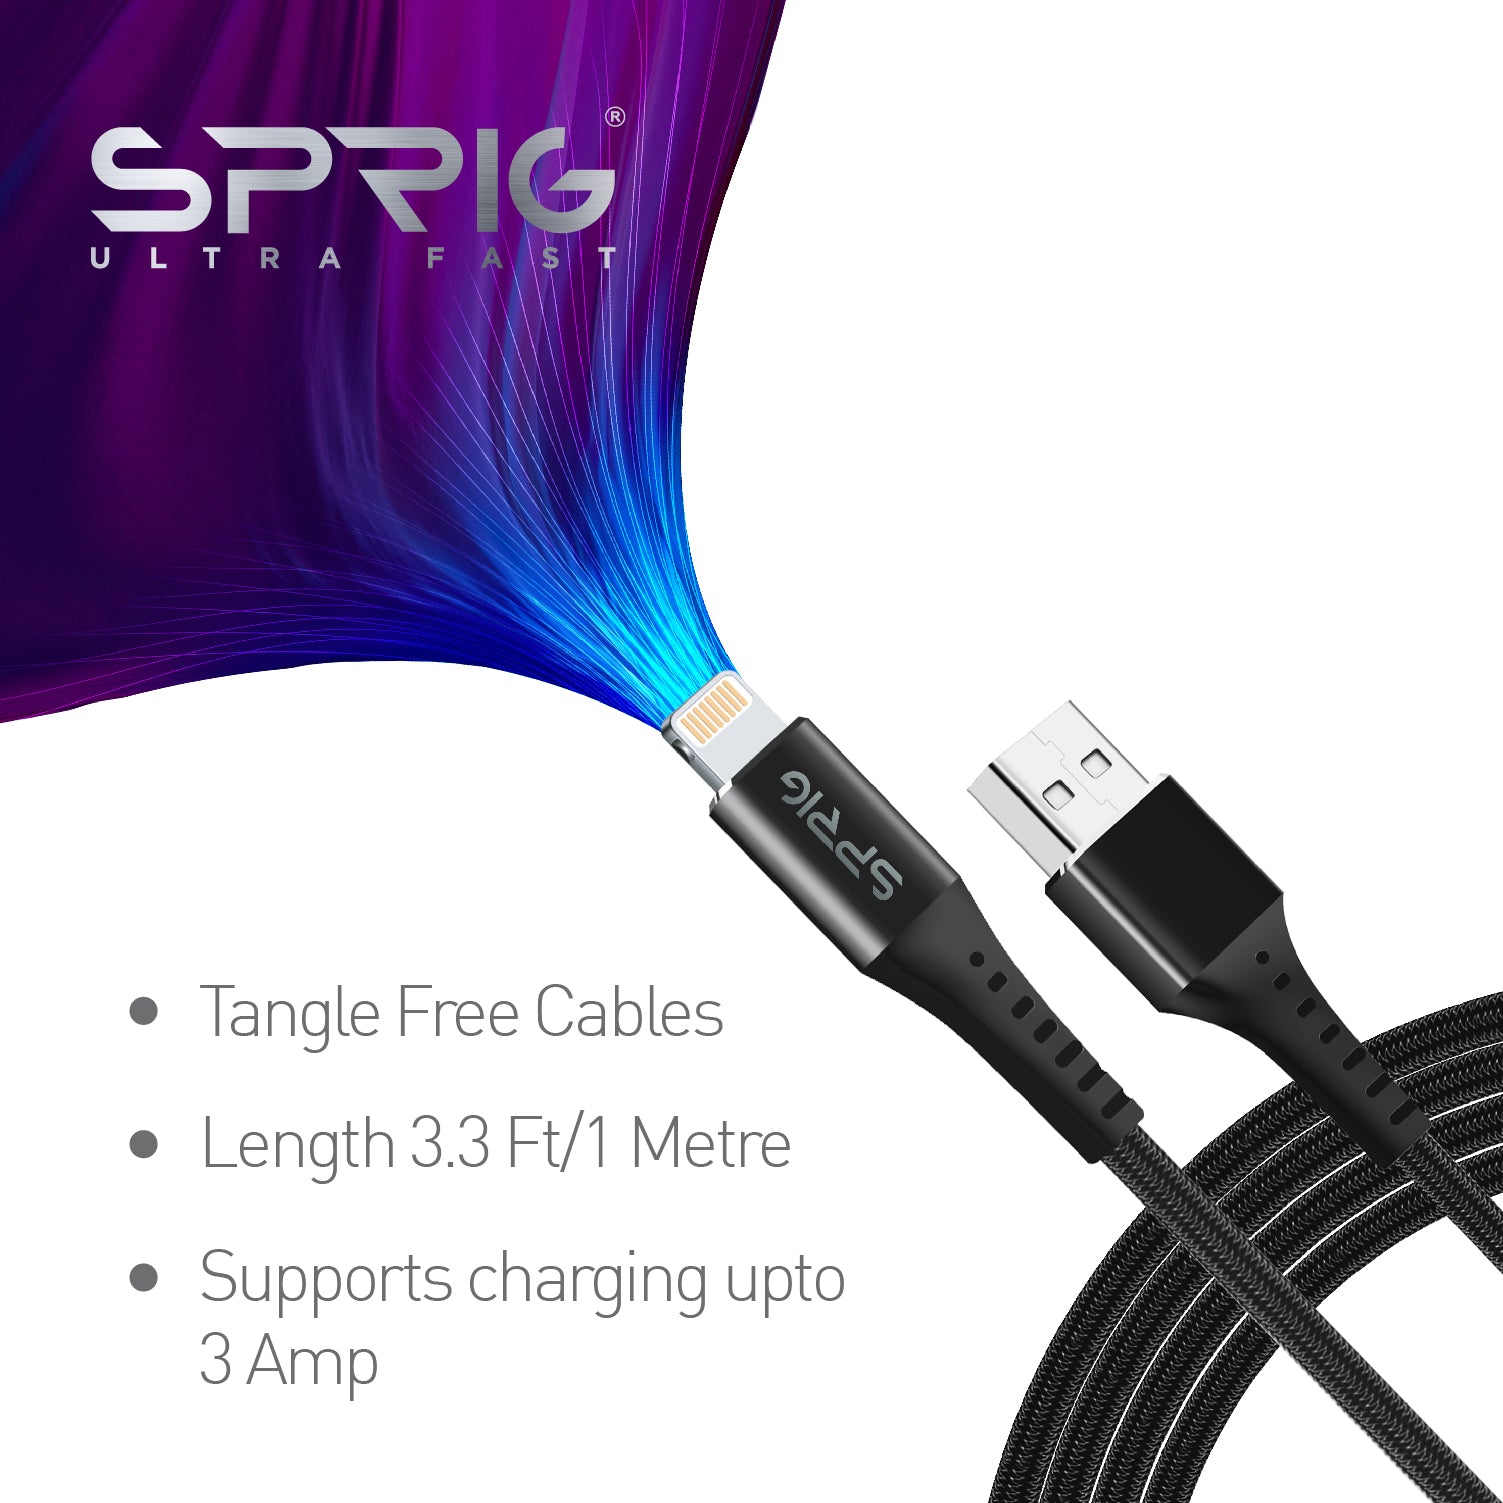 sprig ultra fast denim braided lightning charging / data sync cable for iphone (1m)